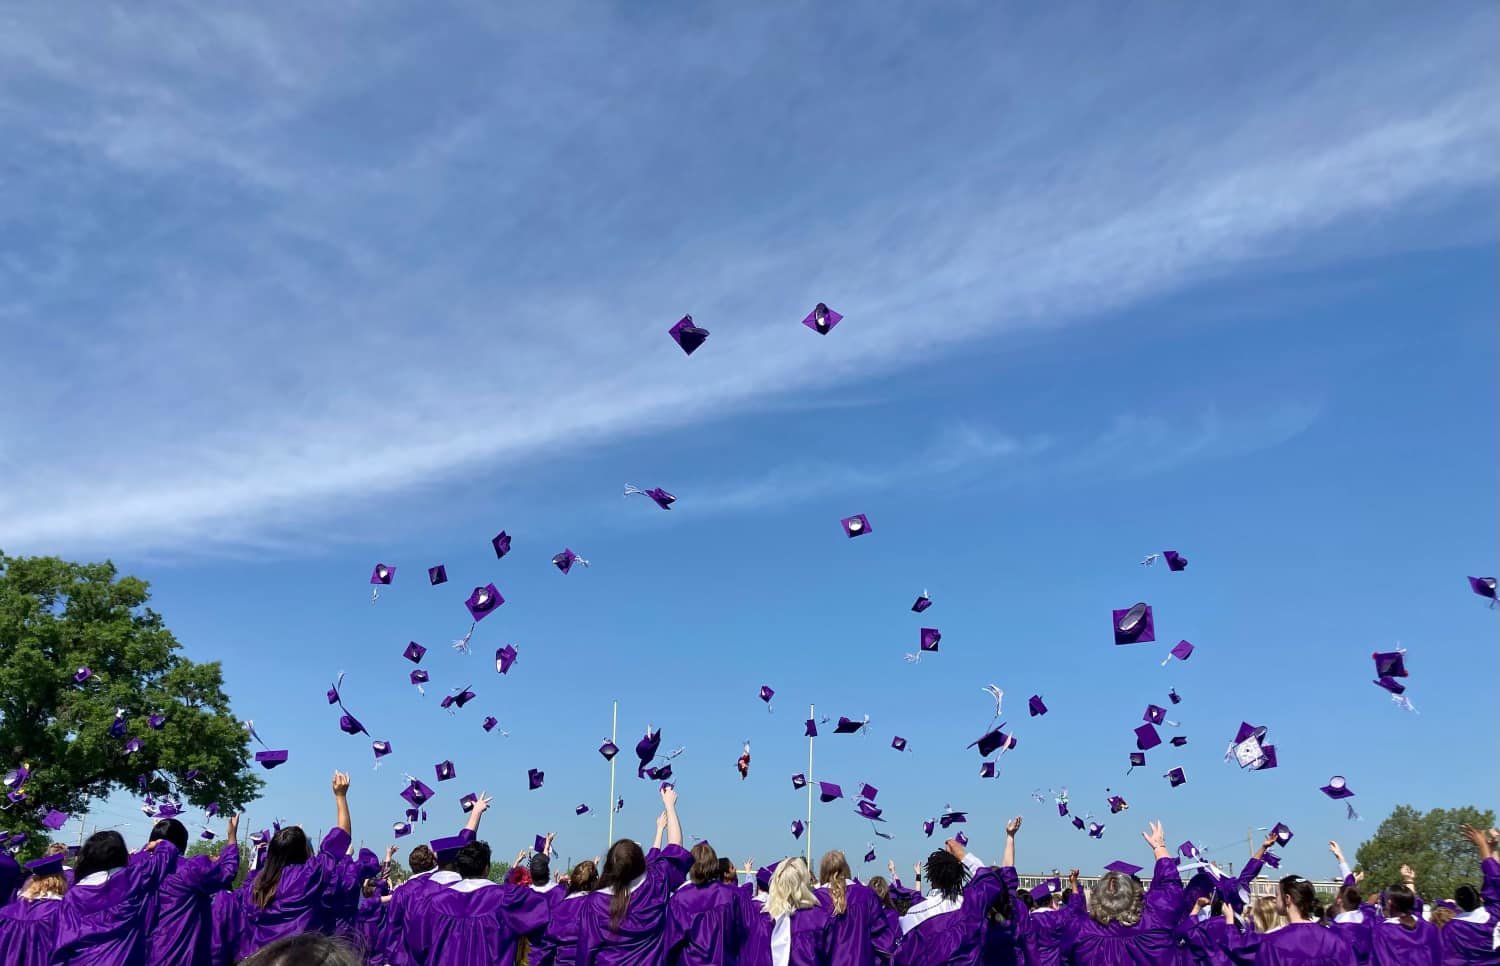 Pittsburg High School held its 2022 Commencement Ceremony on Saturday morning at Hutchinson Field. “Graduates, you made it,” said Superintendent Rich Proffitt. “You have just come to the end of the culmination of 13 years of public education. That’s at a minimum 2,262 days, or 16,965 hours, of education. And yet it’s just the beginning.”